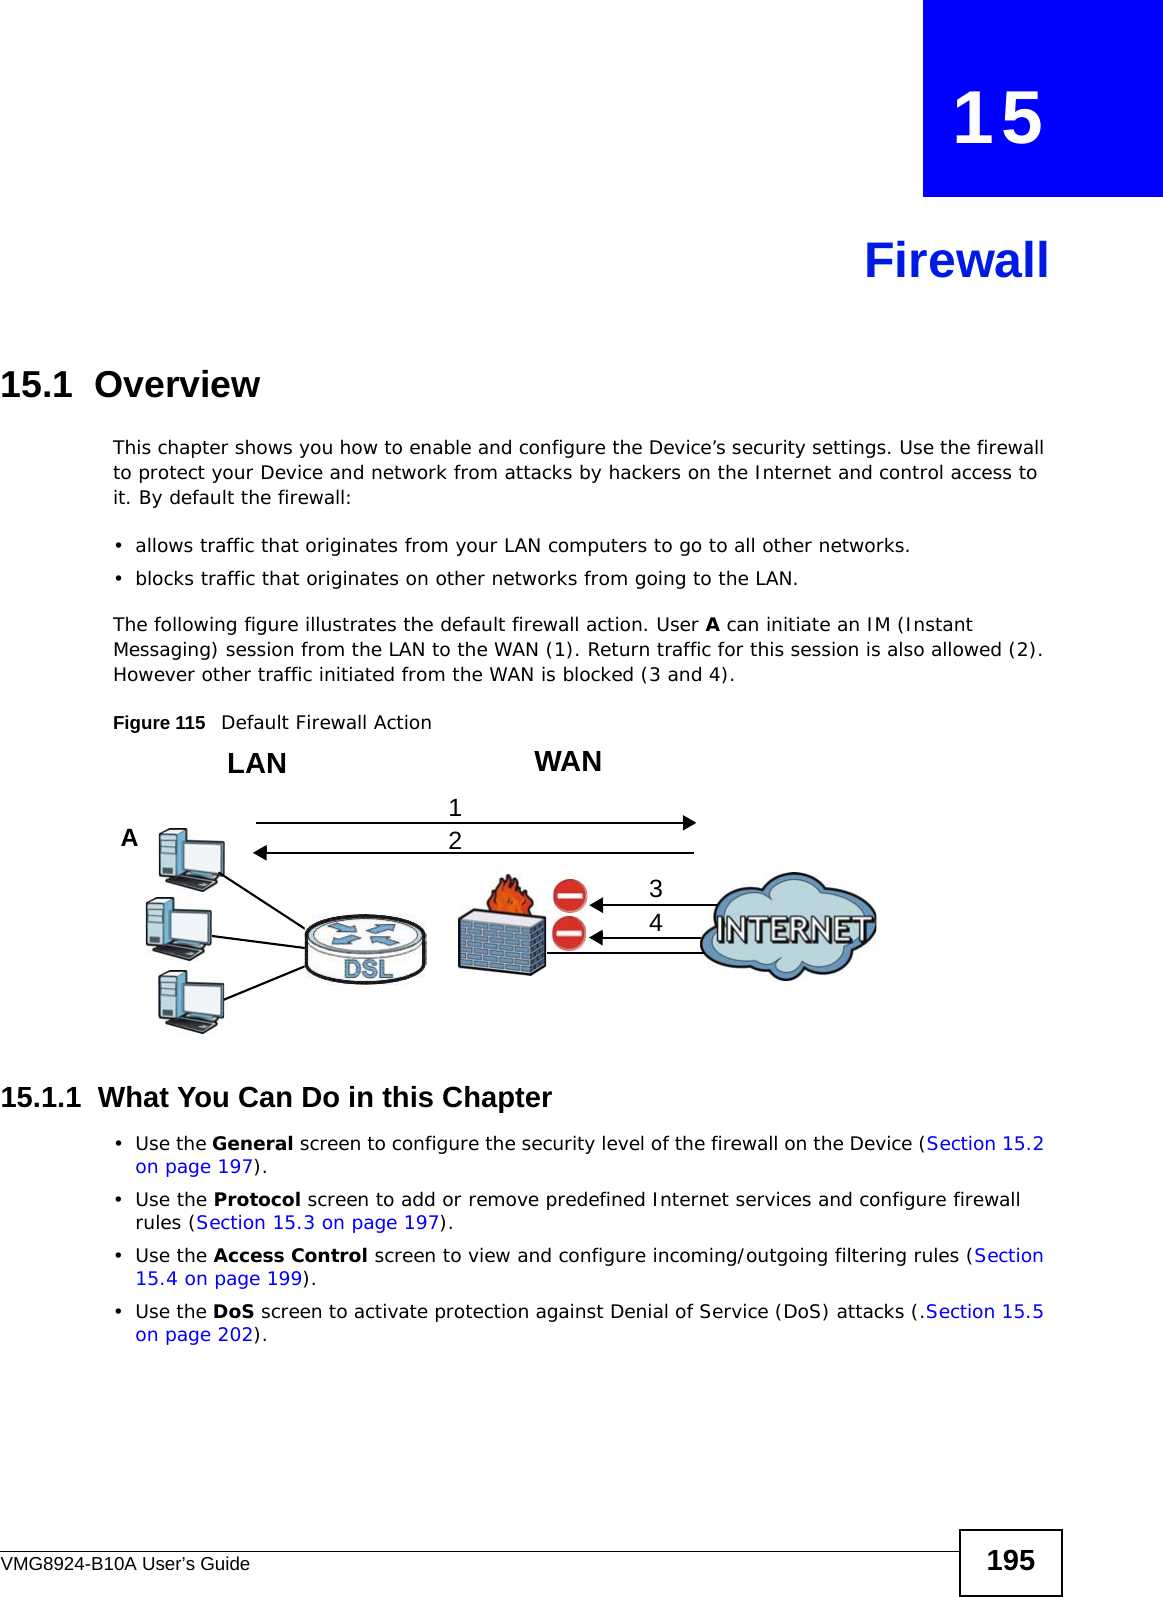 VMG8924-B10A User’s Guide 195CHAPTER   15Firewall15.1  OverviewThis chapter shows you how to enable and configure the Device’s security settings. Use the firewall to protect your Device and network from attacks by hackers on the Internet and control access to it. By default the firewall:• allows traffic that originates from your LAN computers to go to all other networks. • blocks traffic that originates on other networks from going to the LAN. The following figure illustrates the default firewall action. User A can initiate an IM (Instant Messaging) session from the LAN to the WAN (1). Return traffic for this session is also allowed (2). However other traffic initiated from the WAN is blocked (3 and 4).Figure 115   Default Firewall Action15.1.1  What You Can Do in this Chapter•Use the General screen to configure the security level of the firewall on the Device (Section 15.2 on page 197).•Use the Protocol screen to add or remove predefined Internet services and configure firewall rules (Section 15.3 on page 197).•Use the Access Control screen to view and configure incoming/outgoing filtering rules (Section 15.4 on page 199). •Use the DoS screen to activate protection against Denial of Service (DoS) attacks (.Section 15.5 on page 202).WANLAN3412A